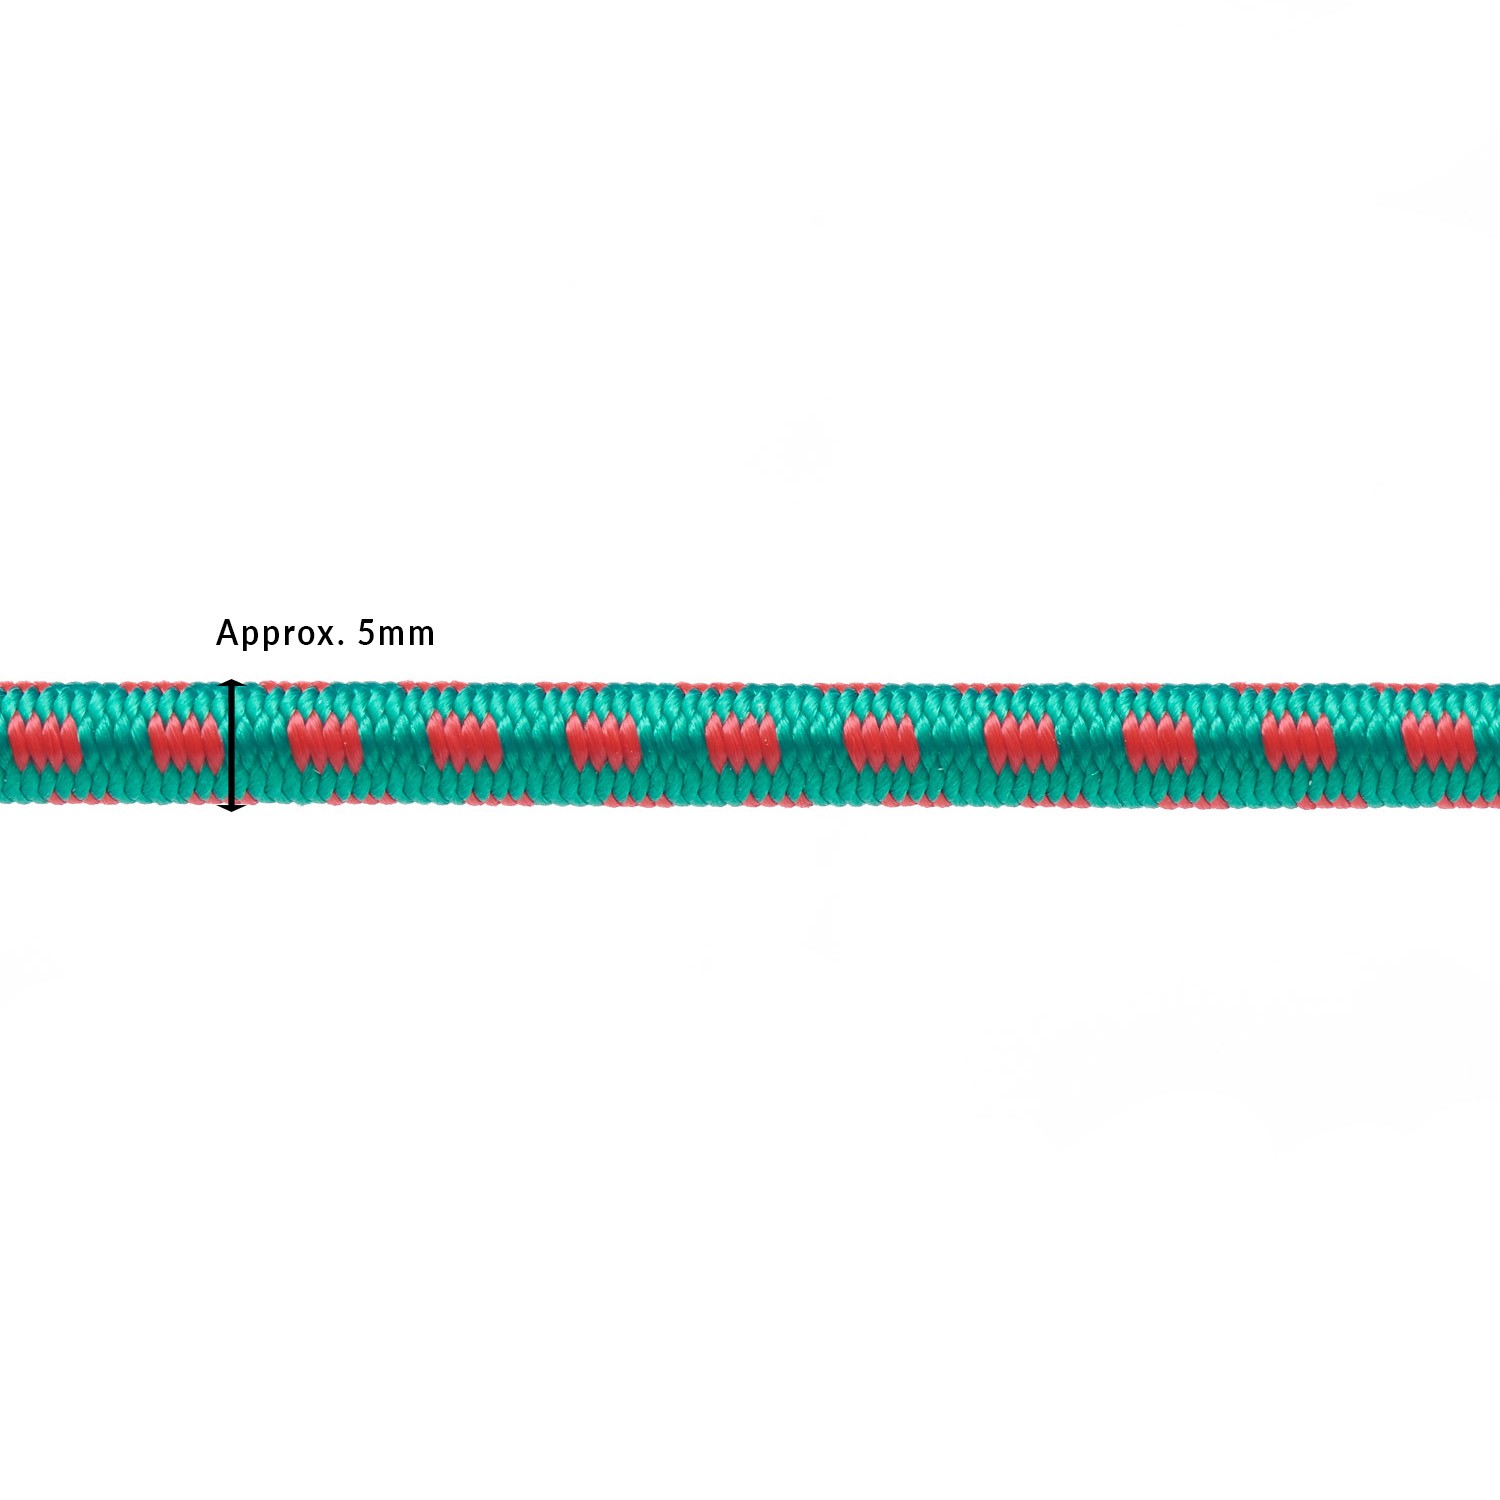 PE114 5mm Round Bungee Shock Cord Emerald Green with Red Blocks Edit 1 Kalsi Cords